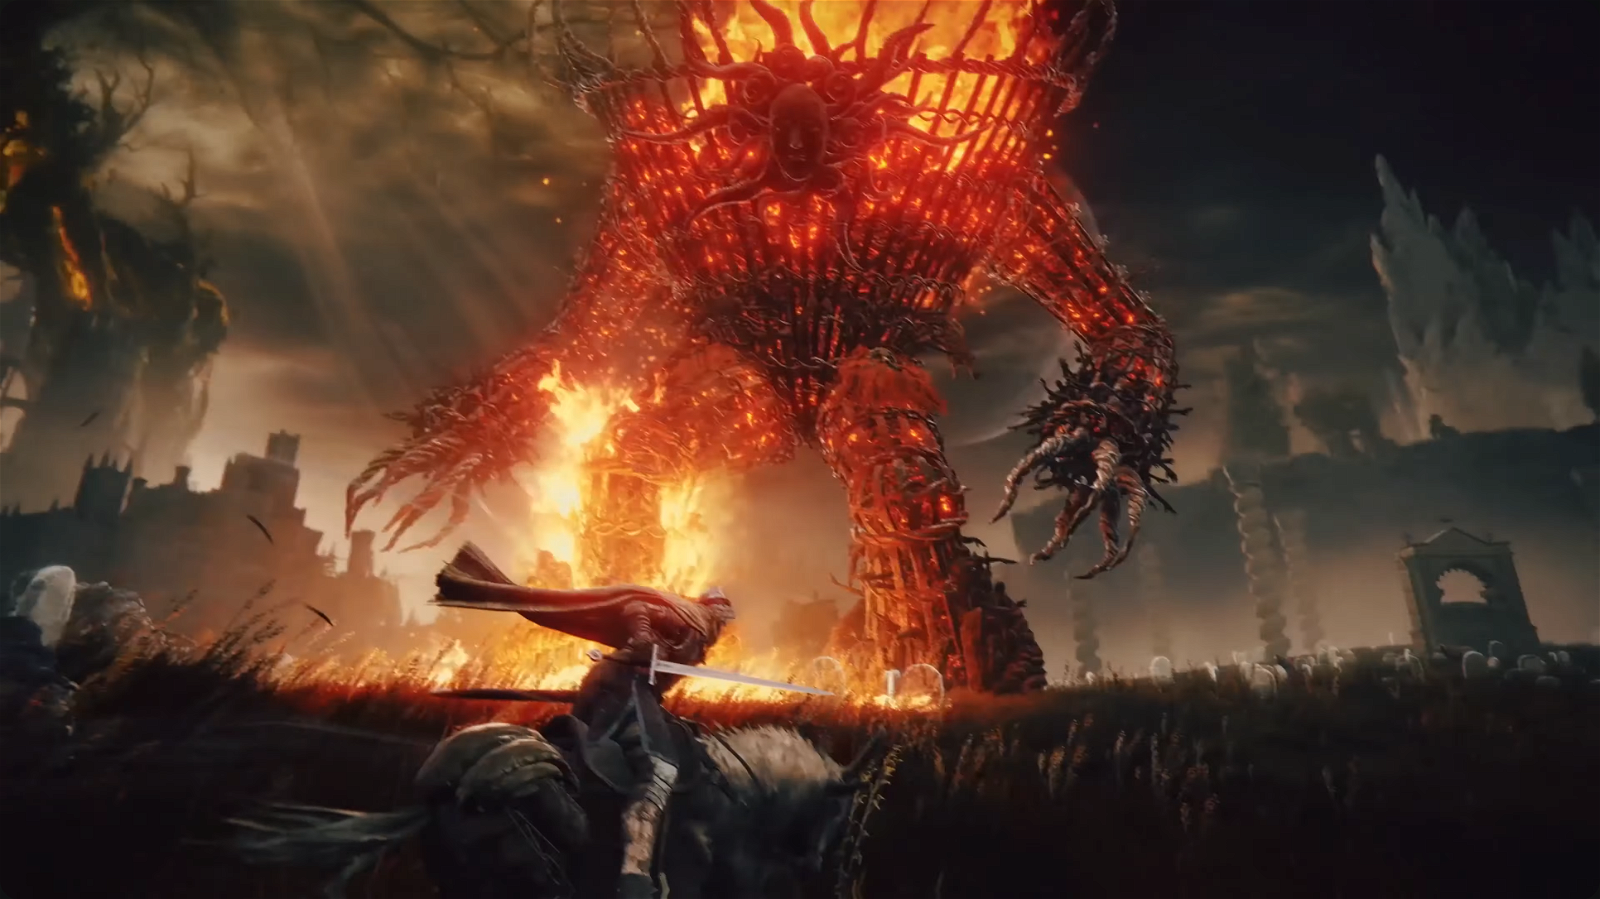 The Fire Golem battle will pull you to the edge of your seat